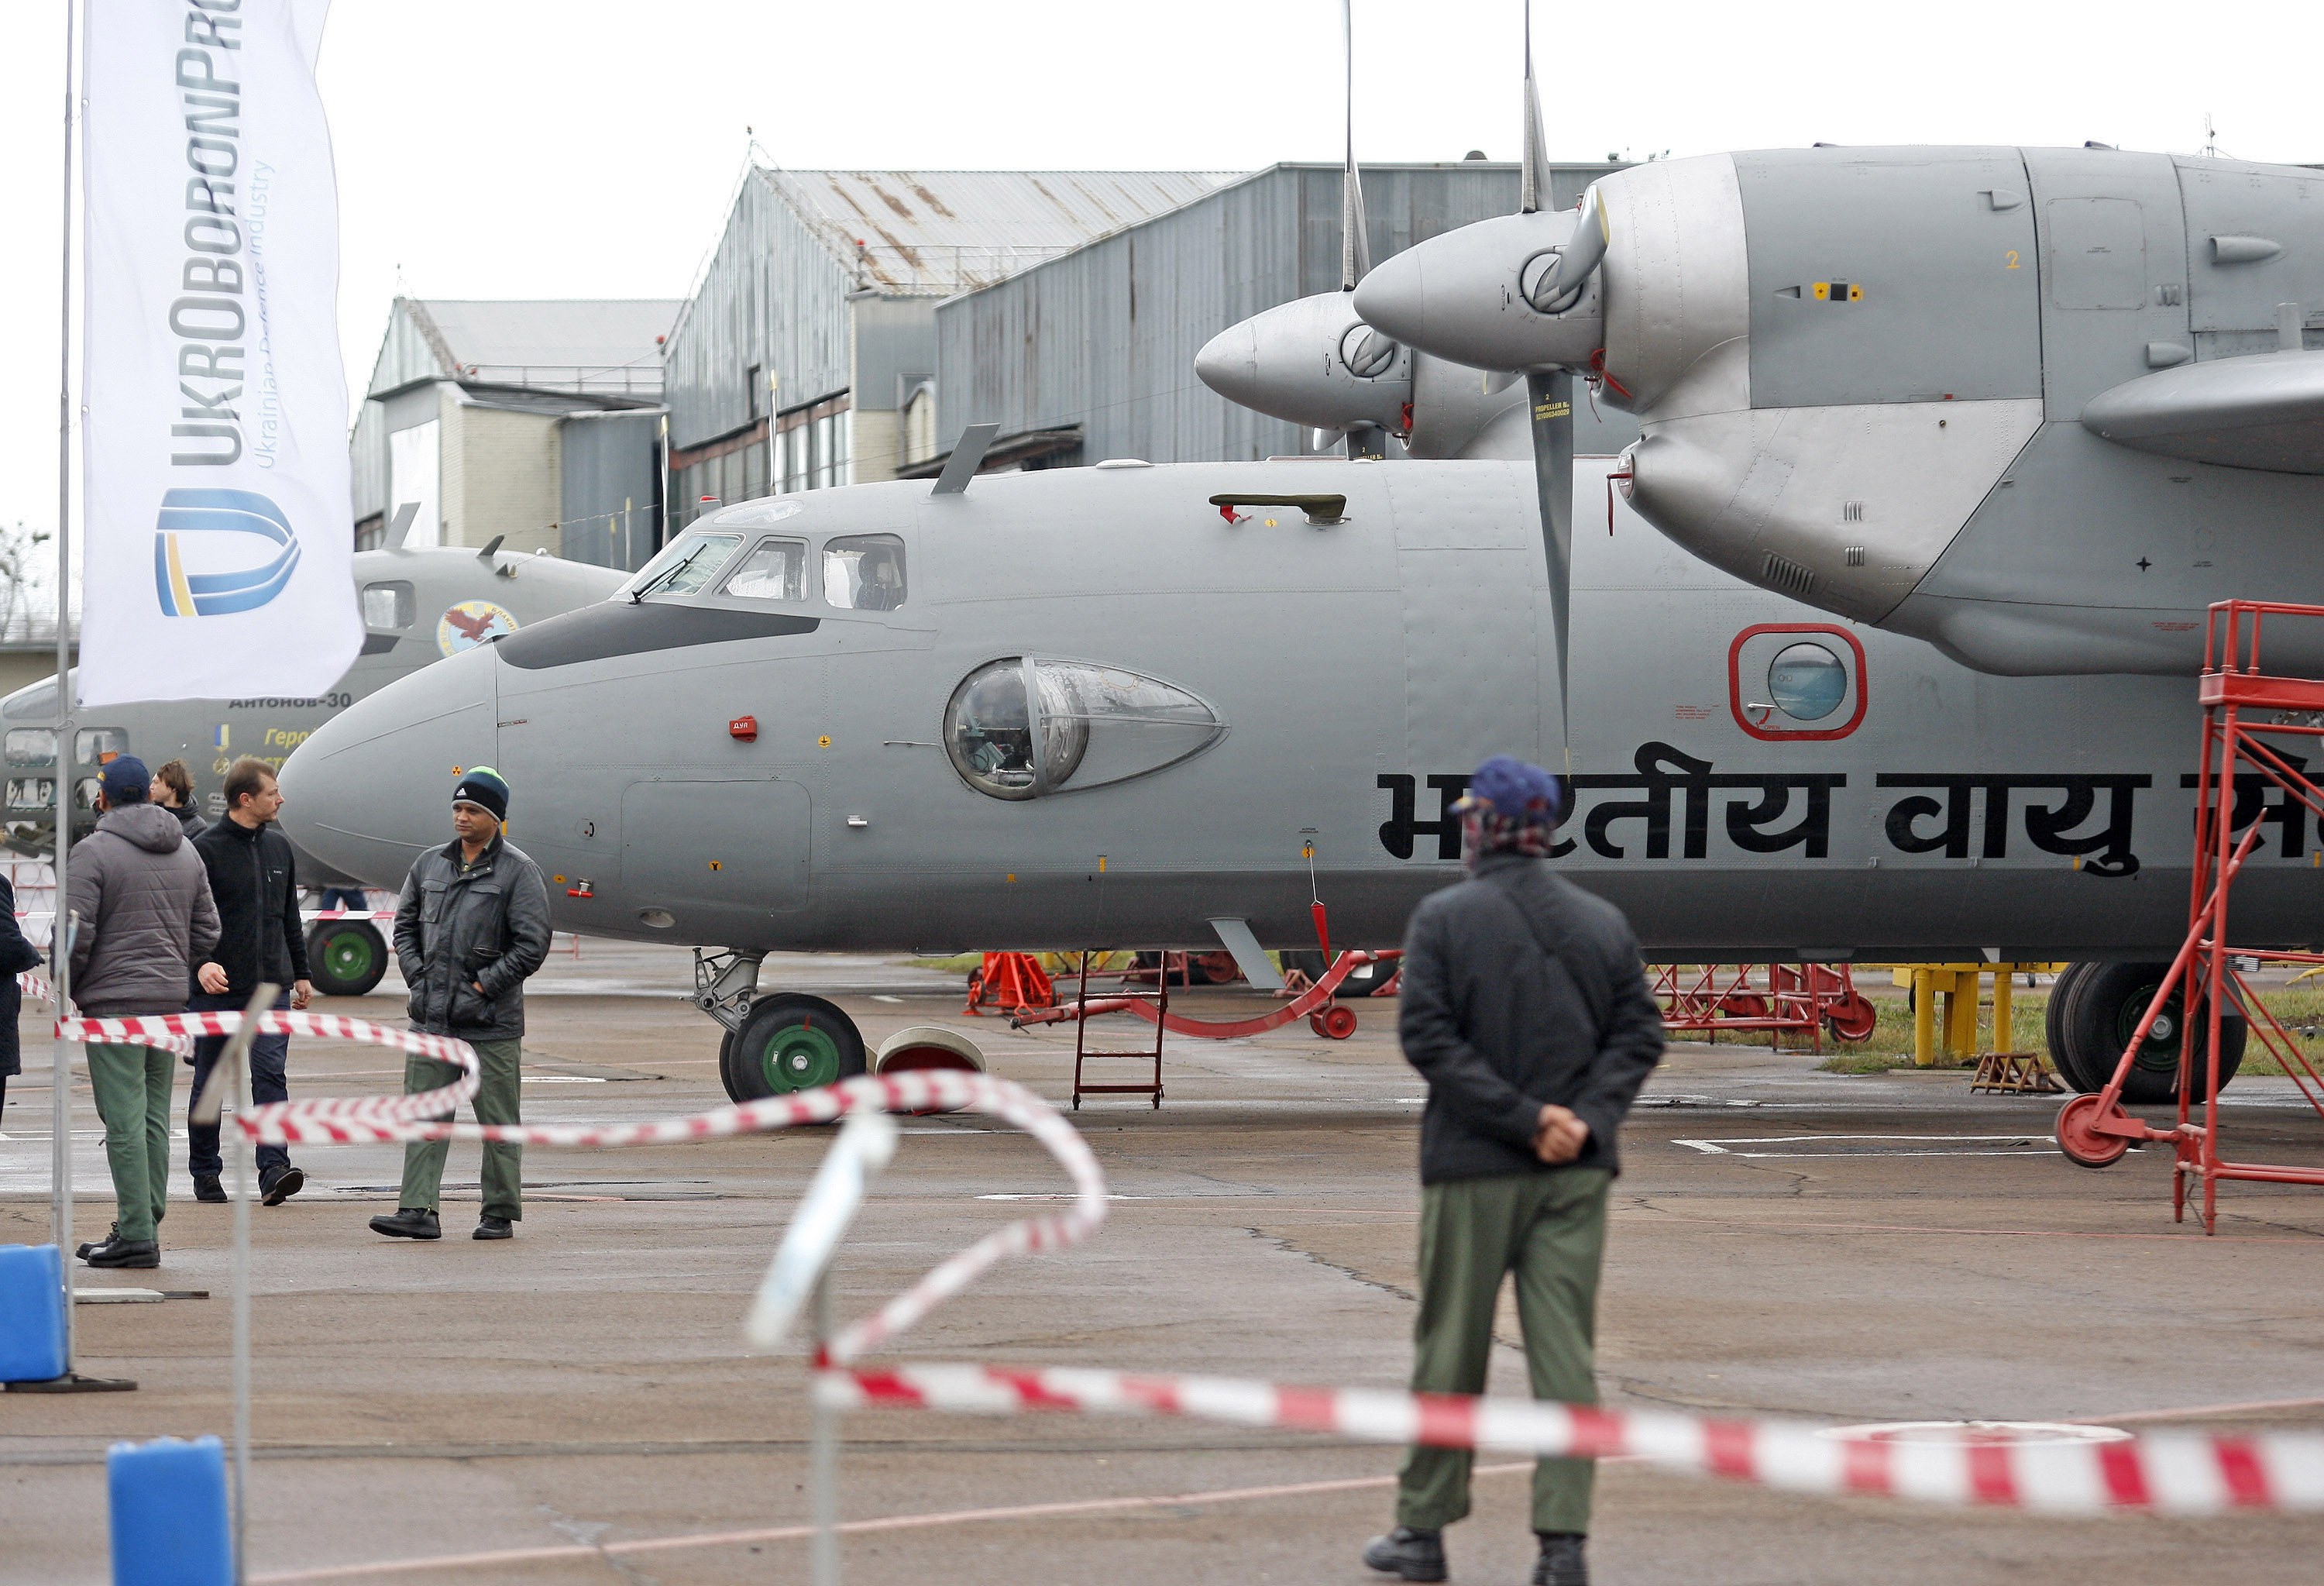 Representatives of Indian Air Force during the handover of 5 modernized AN-32RE planes for IAF on November 19, 2015 in Kiev, Ukraine.